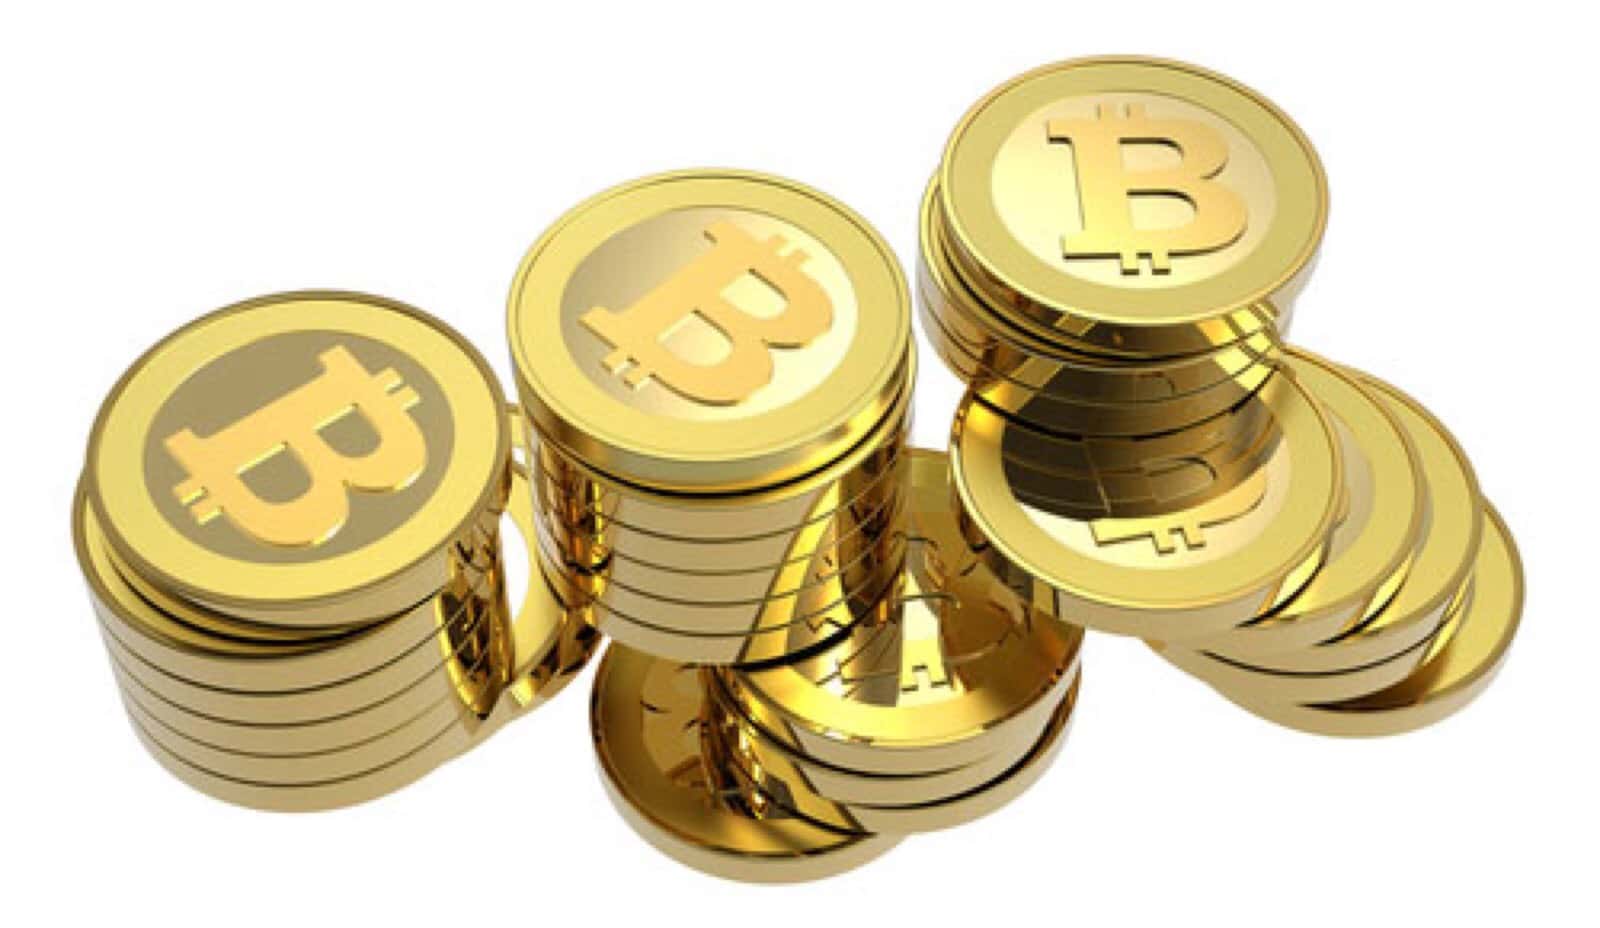 Concept image of Bitcoins, related to Kin cryptocurrency